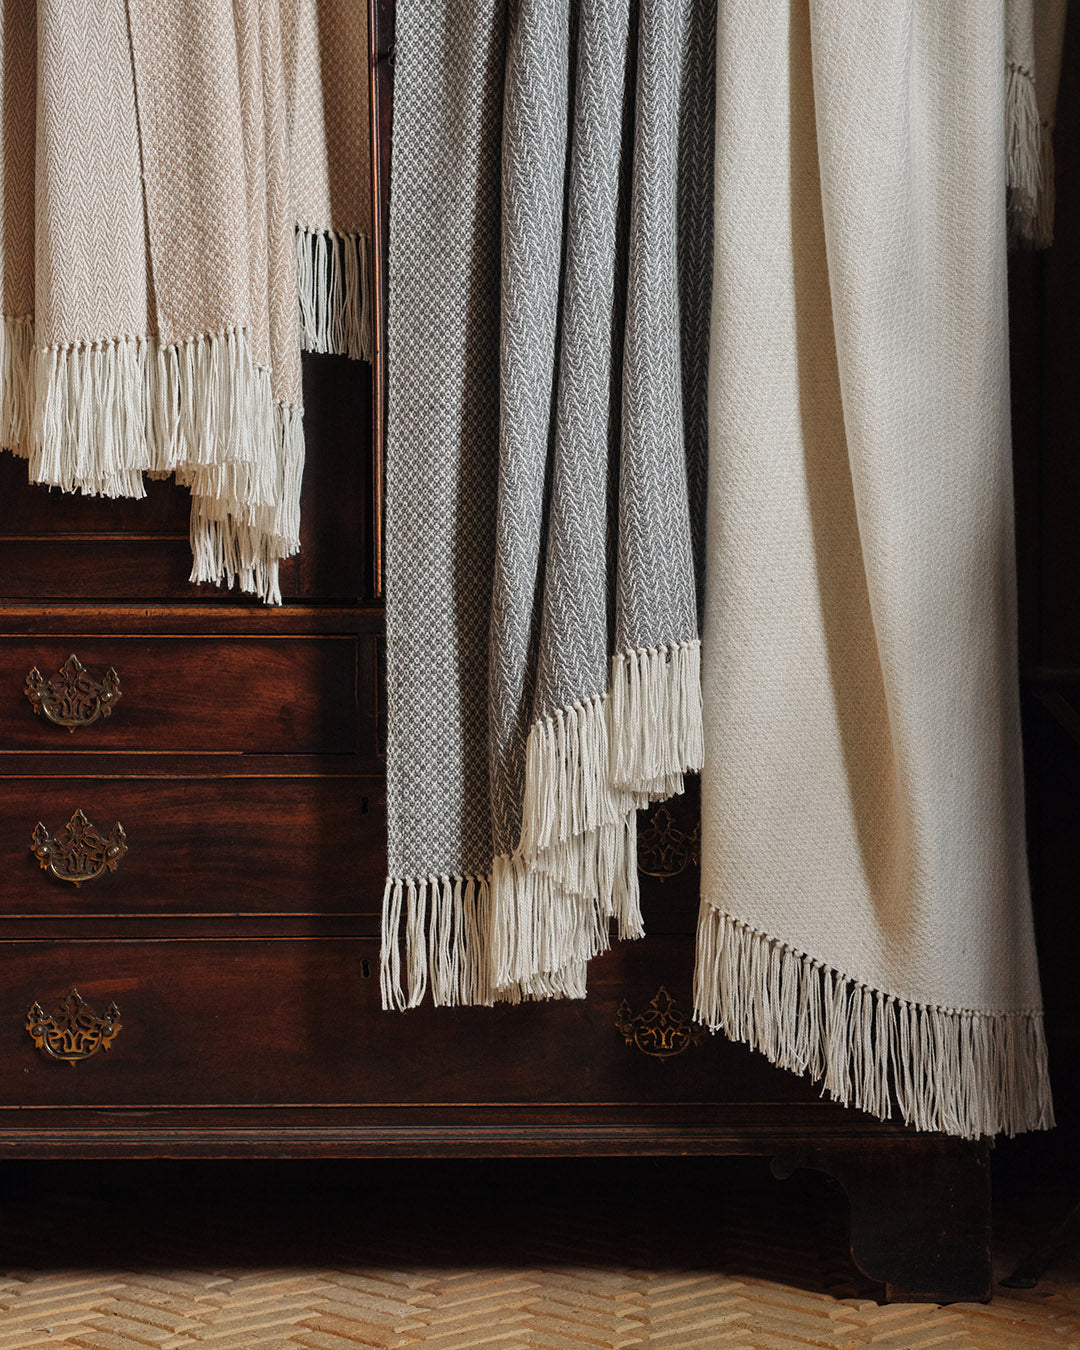 Araminta Campbell kingsize undyed alpaca throw collection in Woodland Inkcap pattern. Shown in rustic wooden interior.